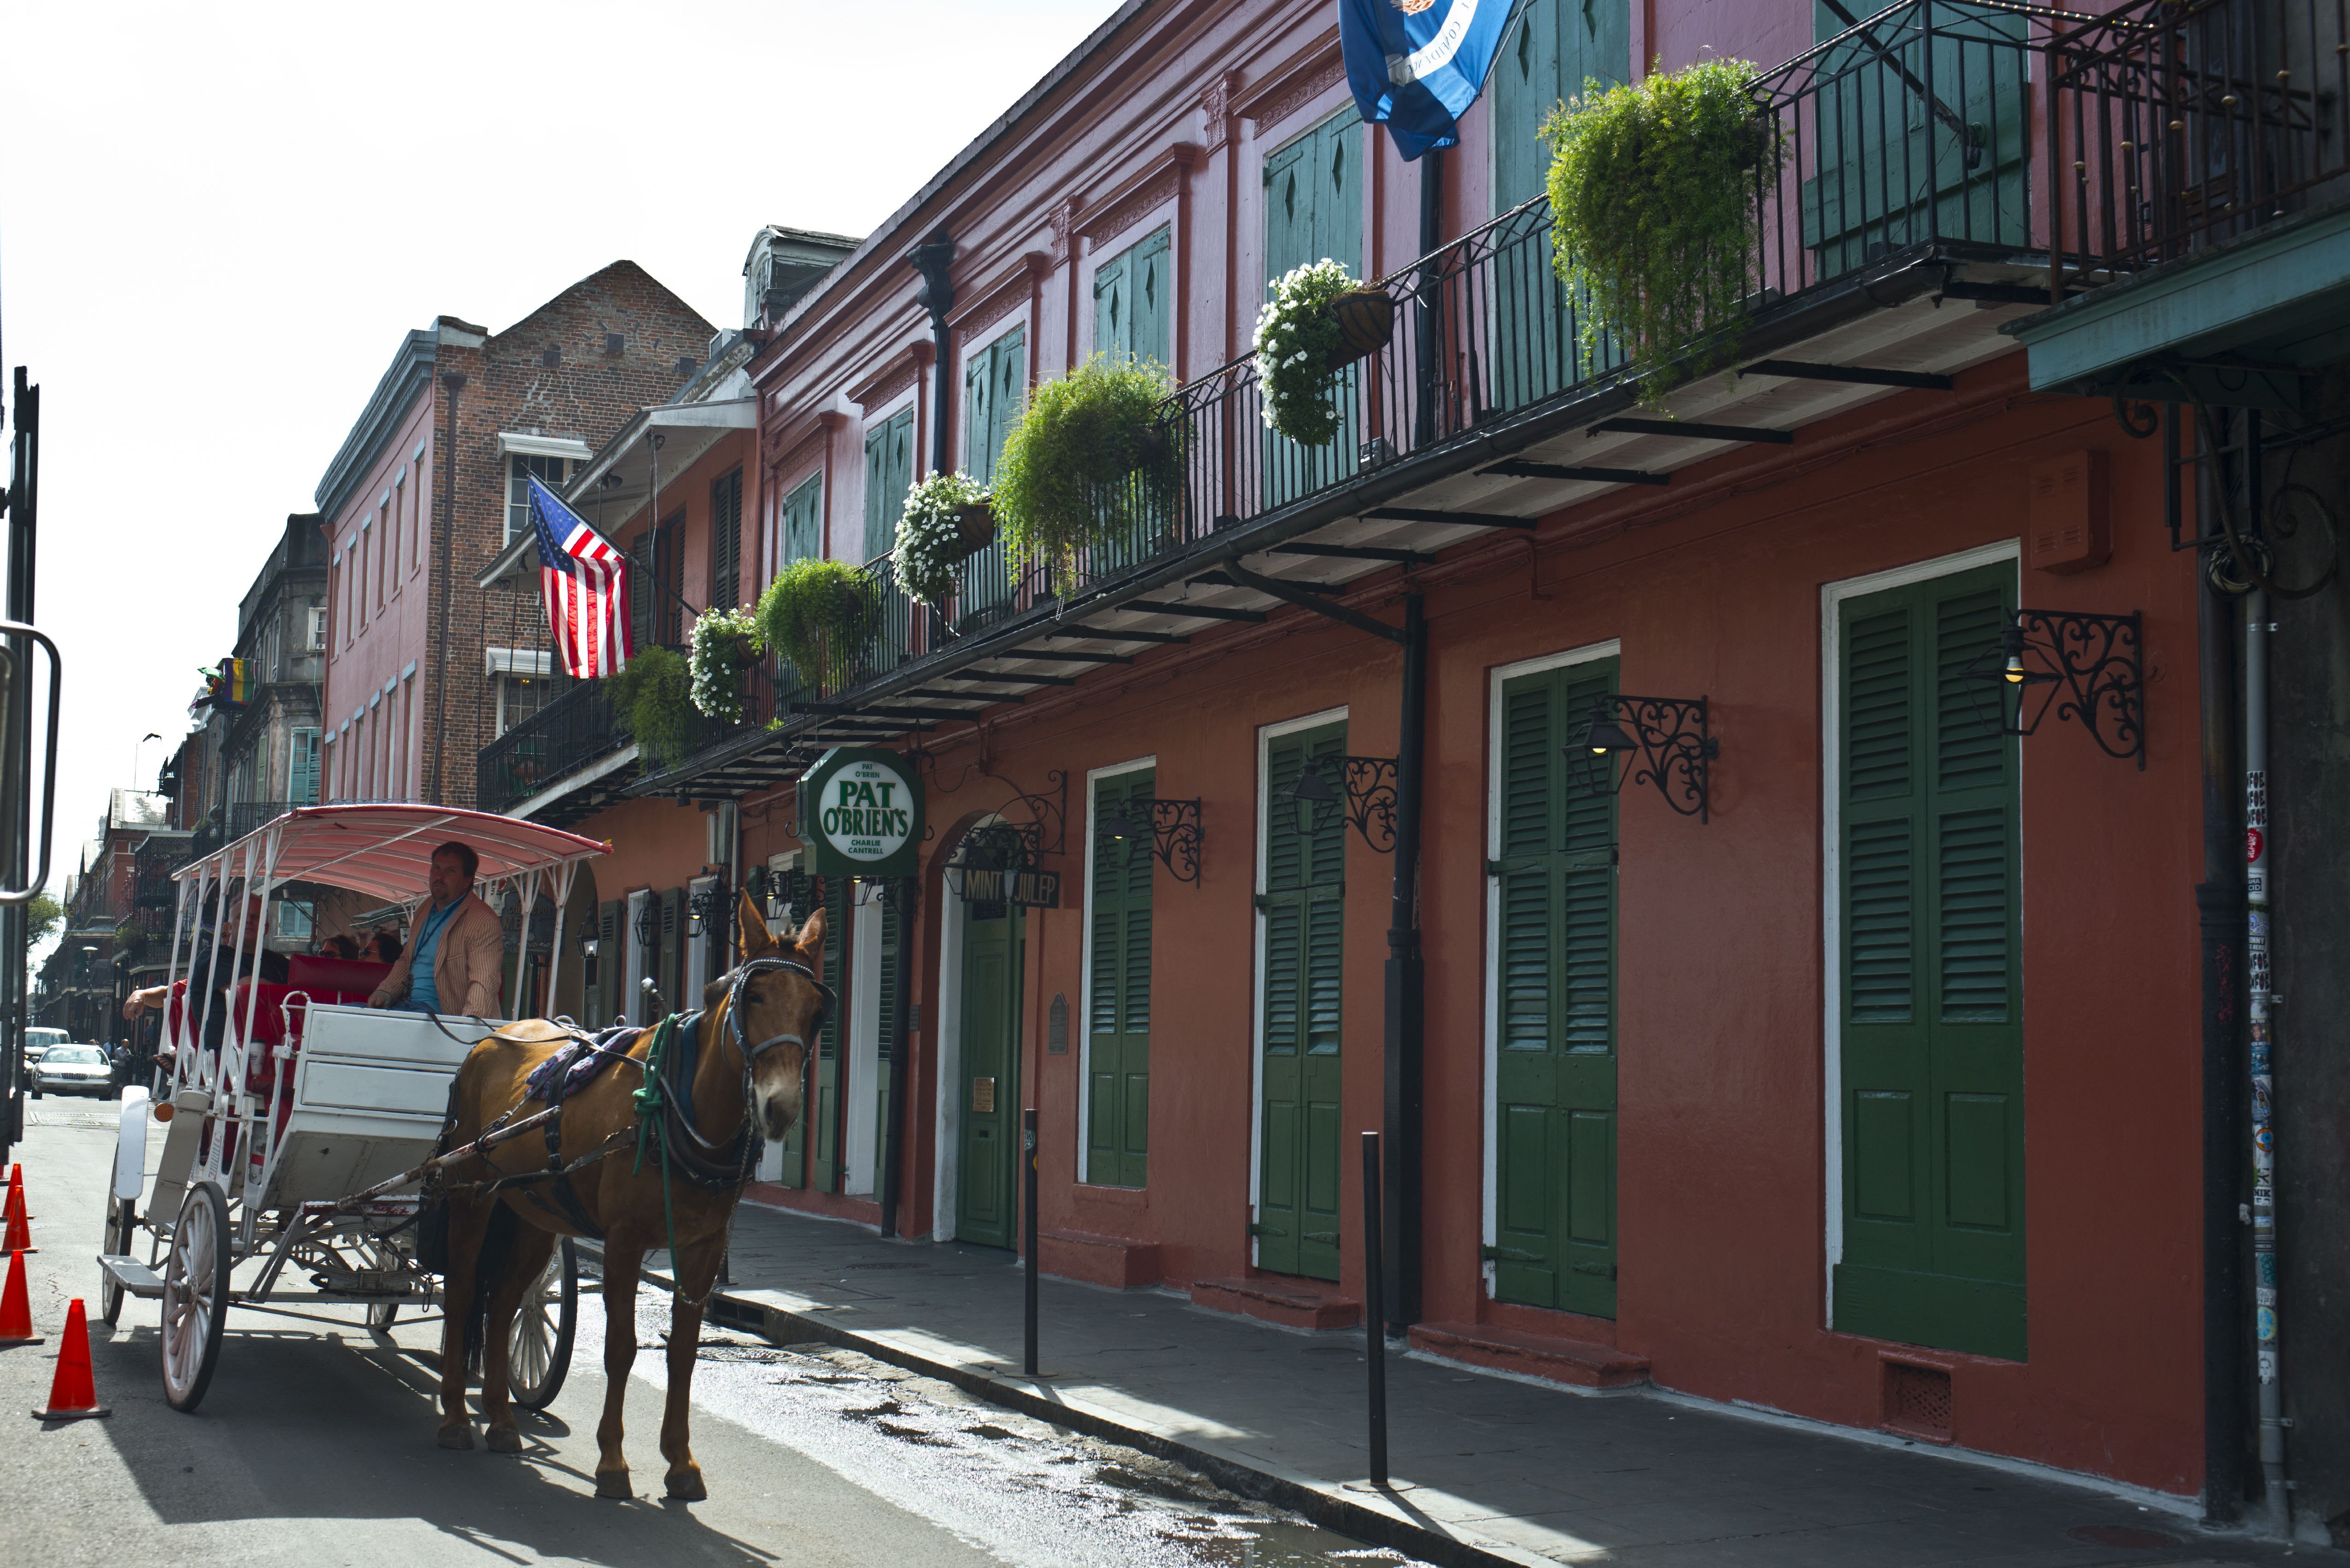 A horse and carriage walks past Pat O'Brien's bar on an otherwise empty French Quarter street.